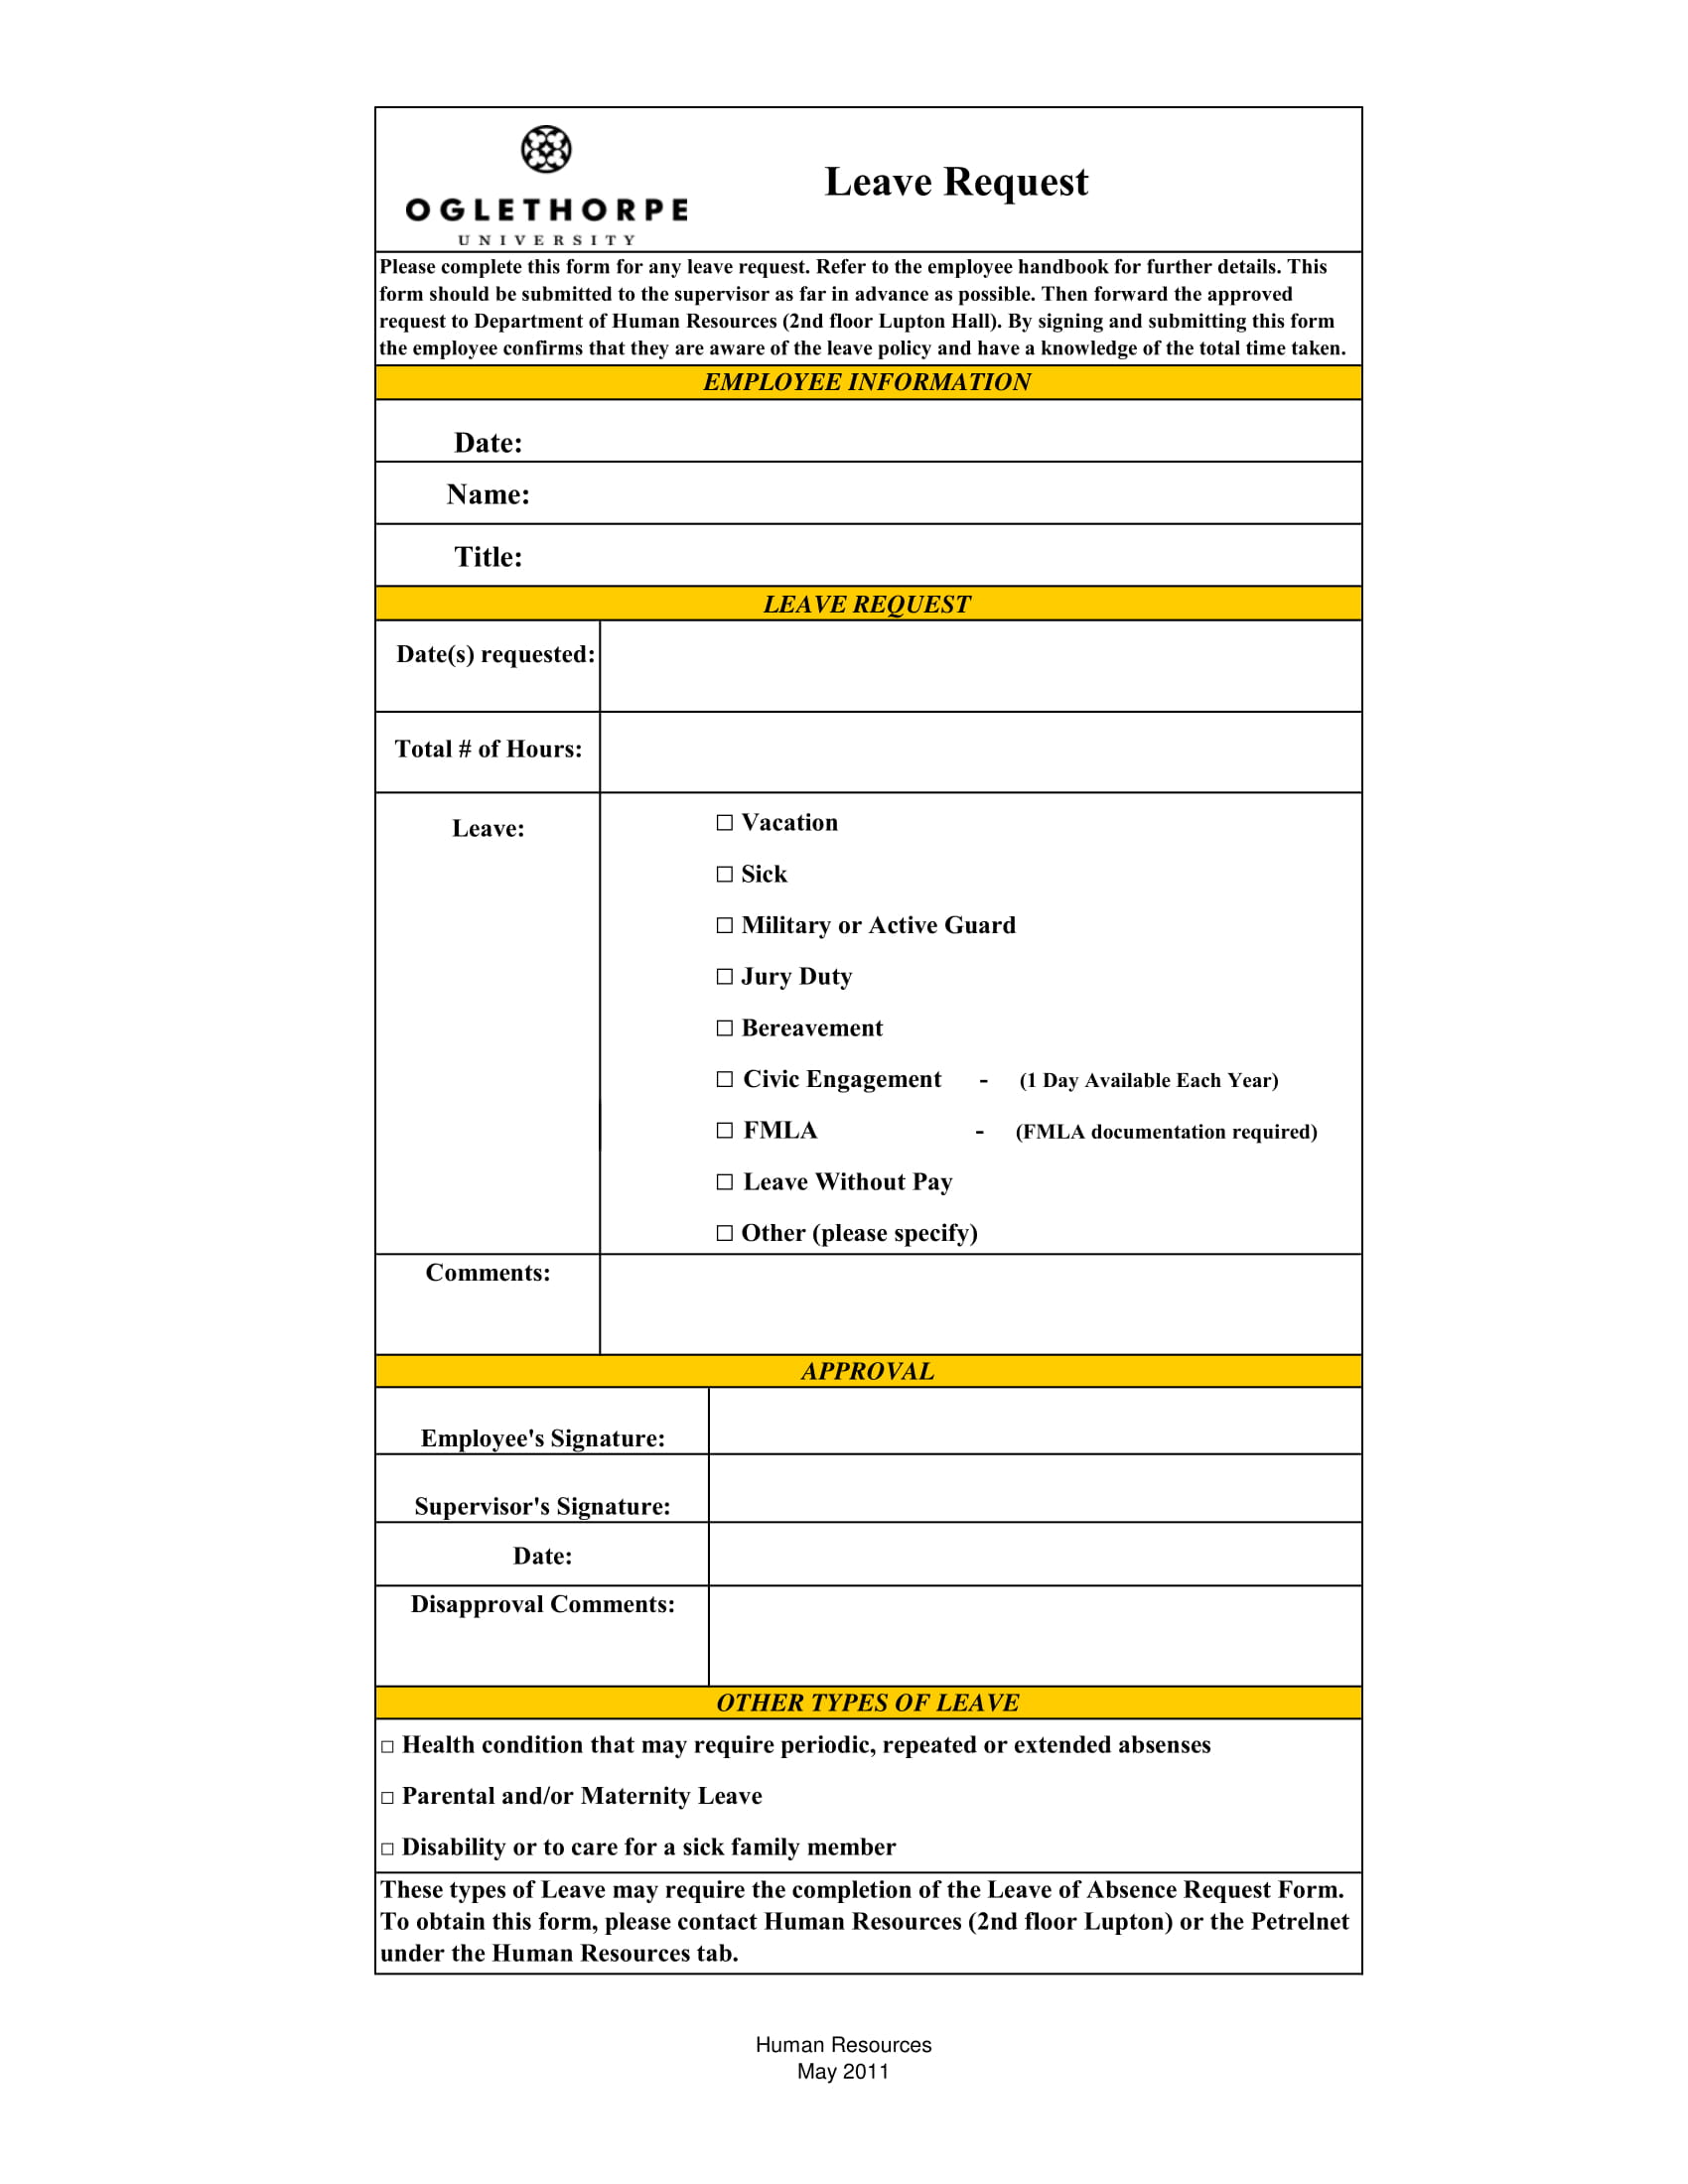 Examples Of Leave Request Forms